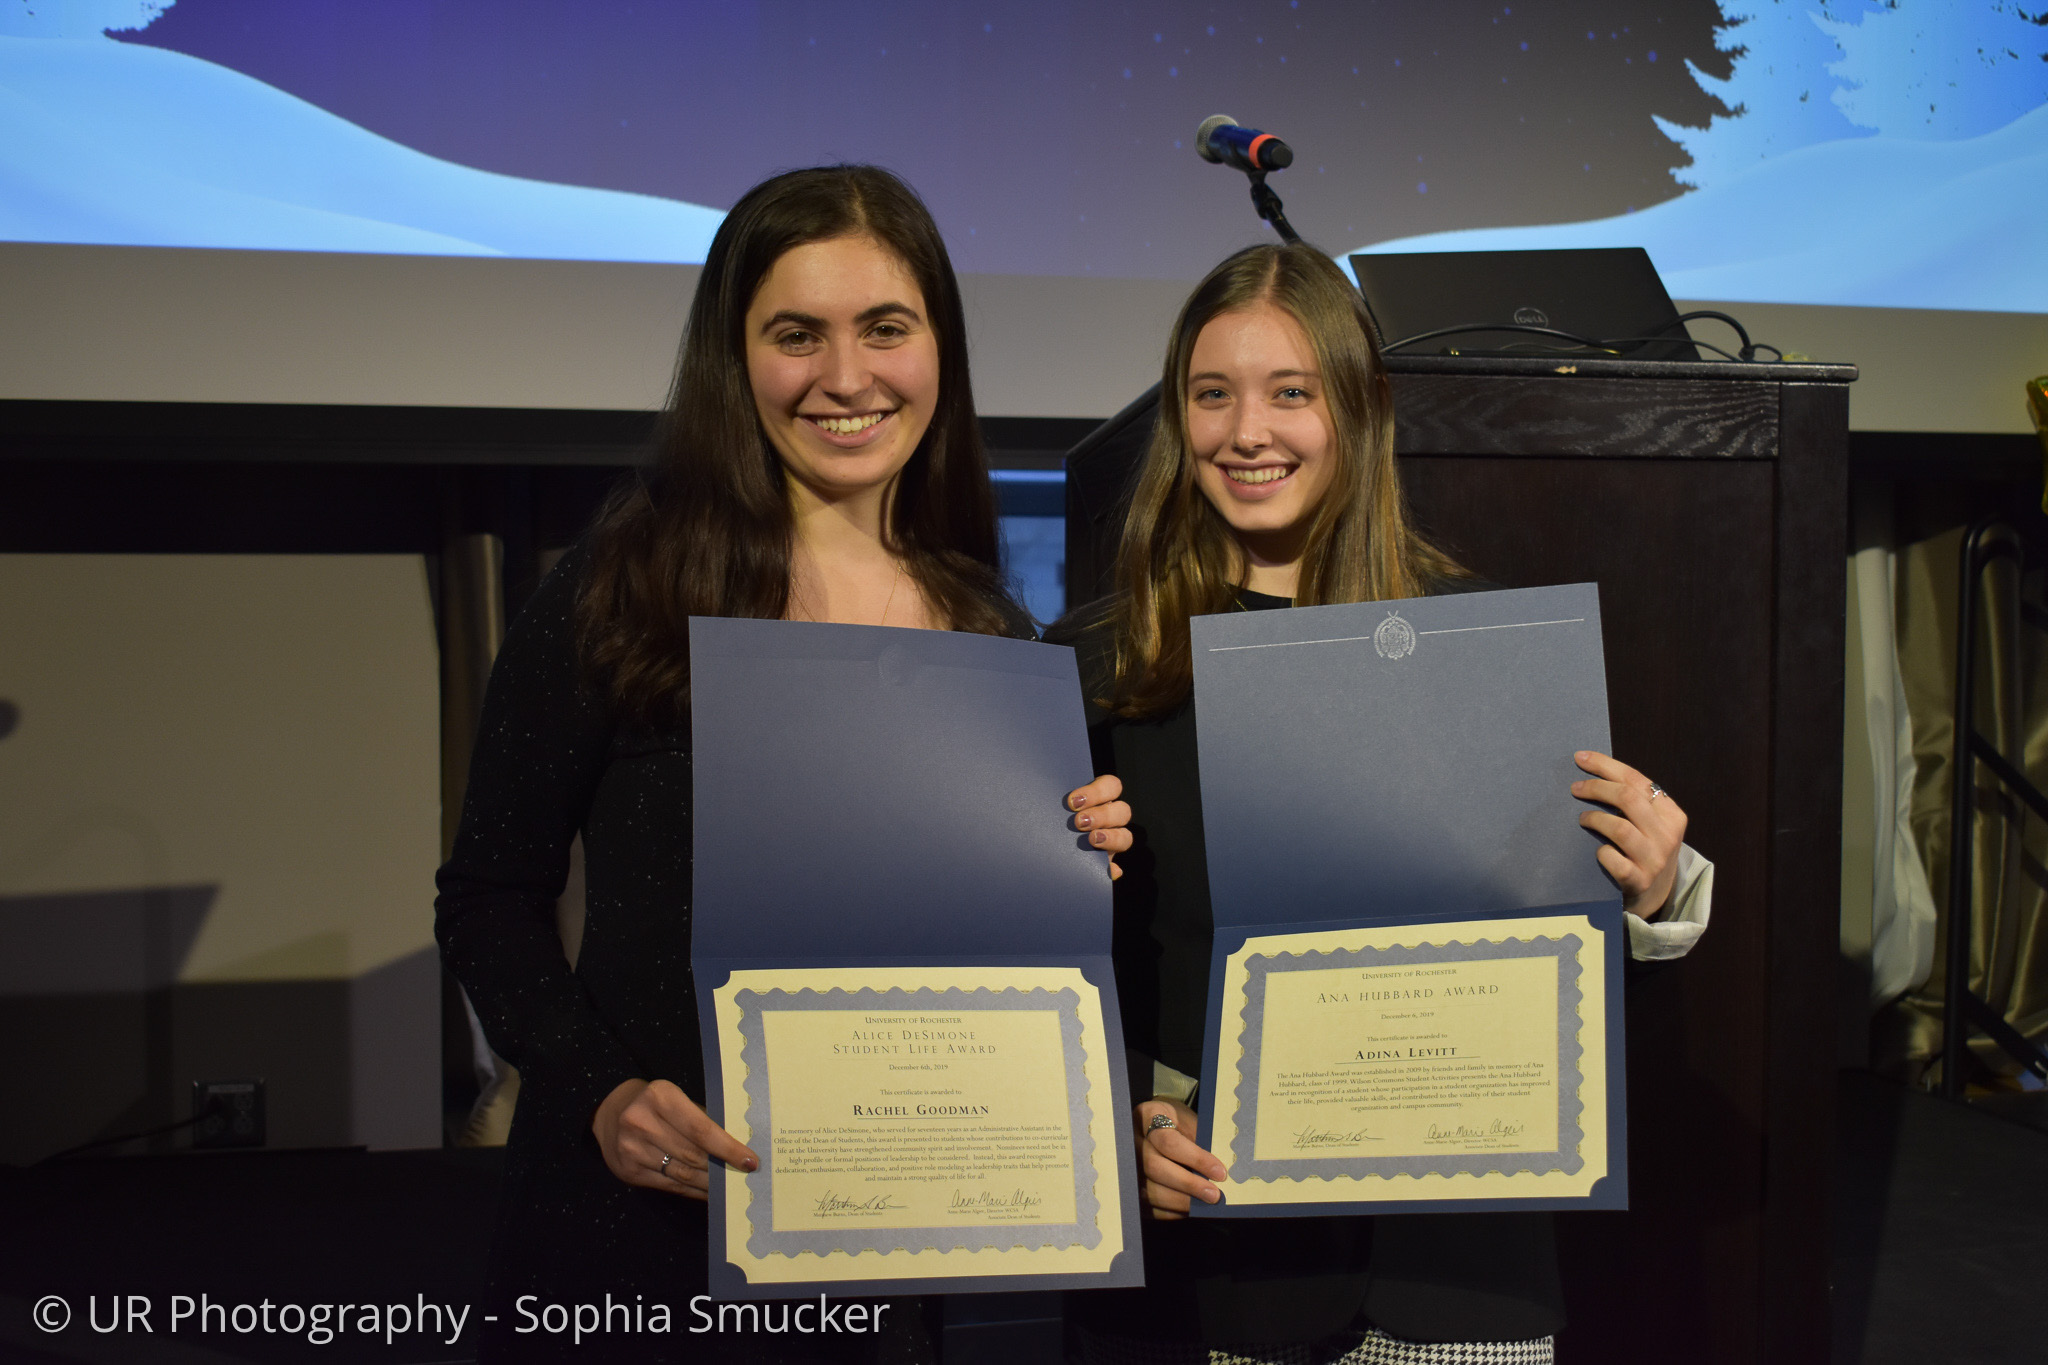 Two students standing with presented certificates while smiling